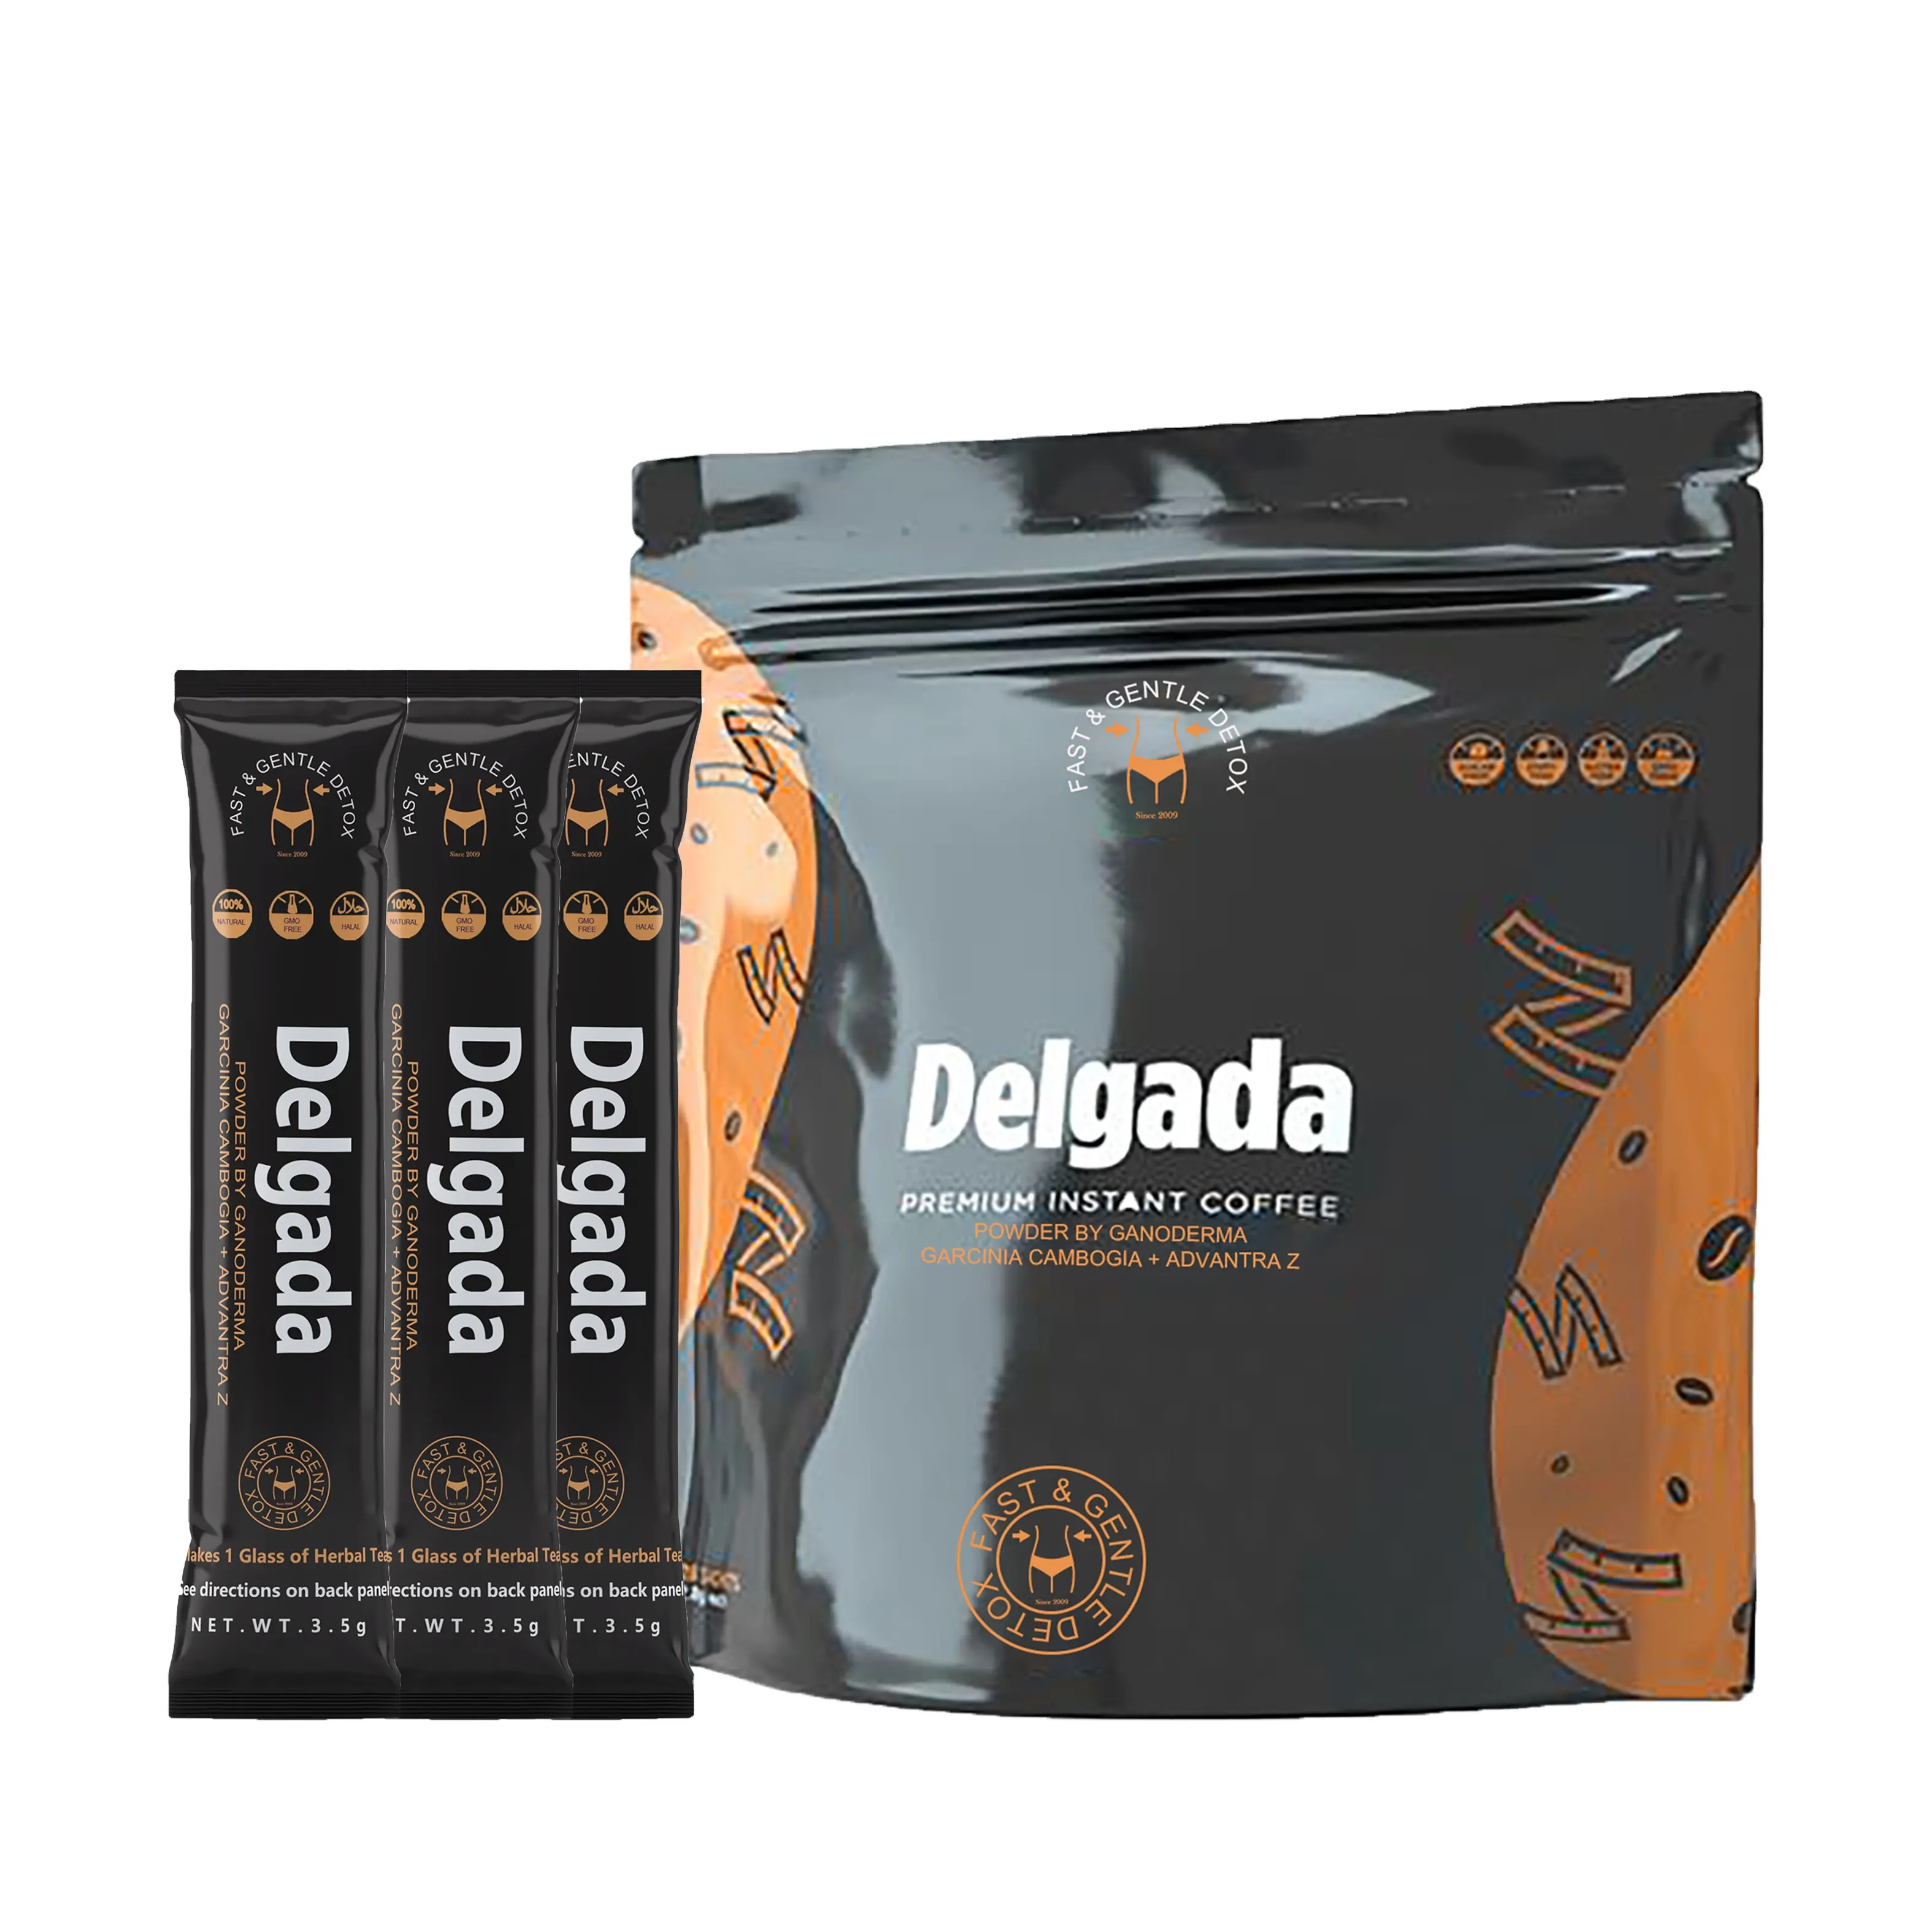 Delgada Coffee Premium Arabica Instant coffee with Ganoderma Help to Lose Weight Body Detox Custom Service Available